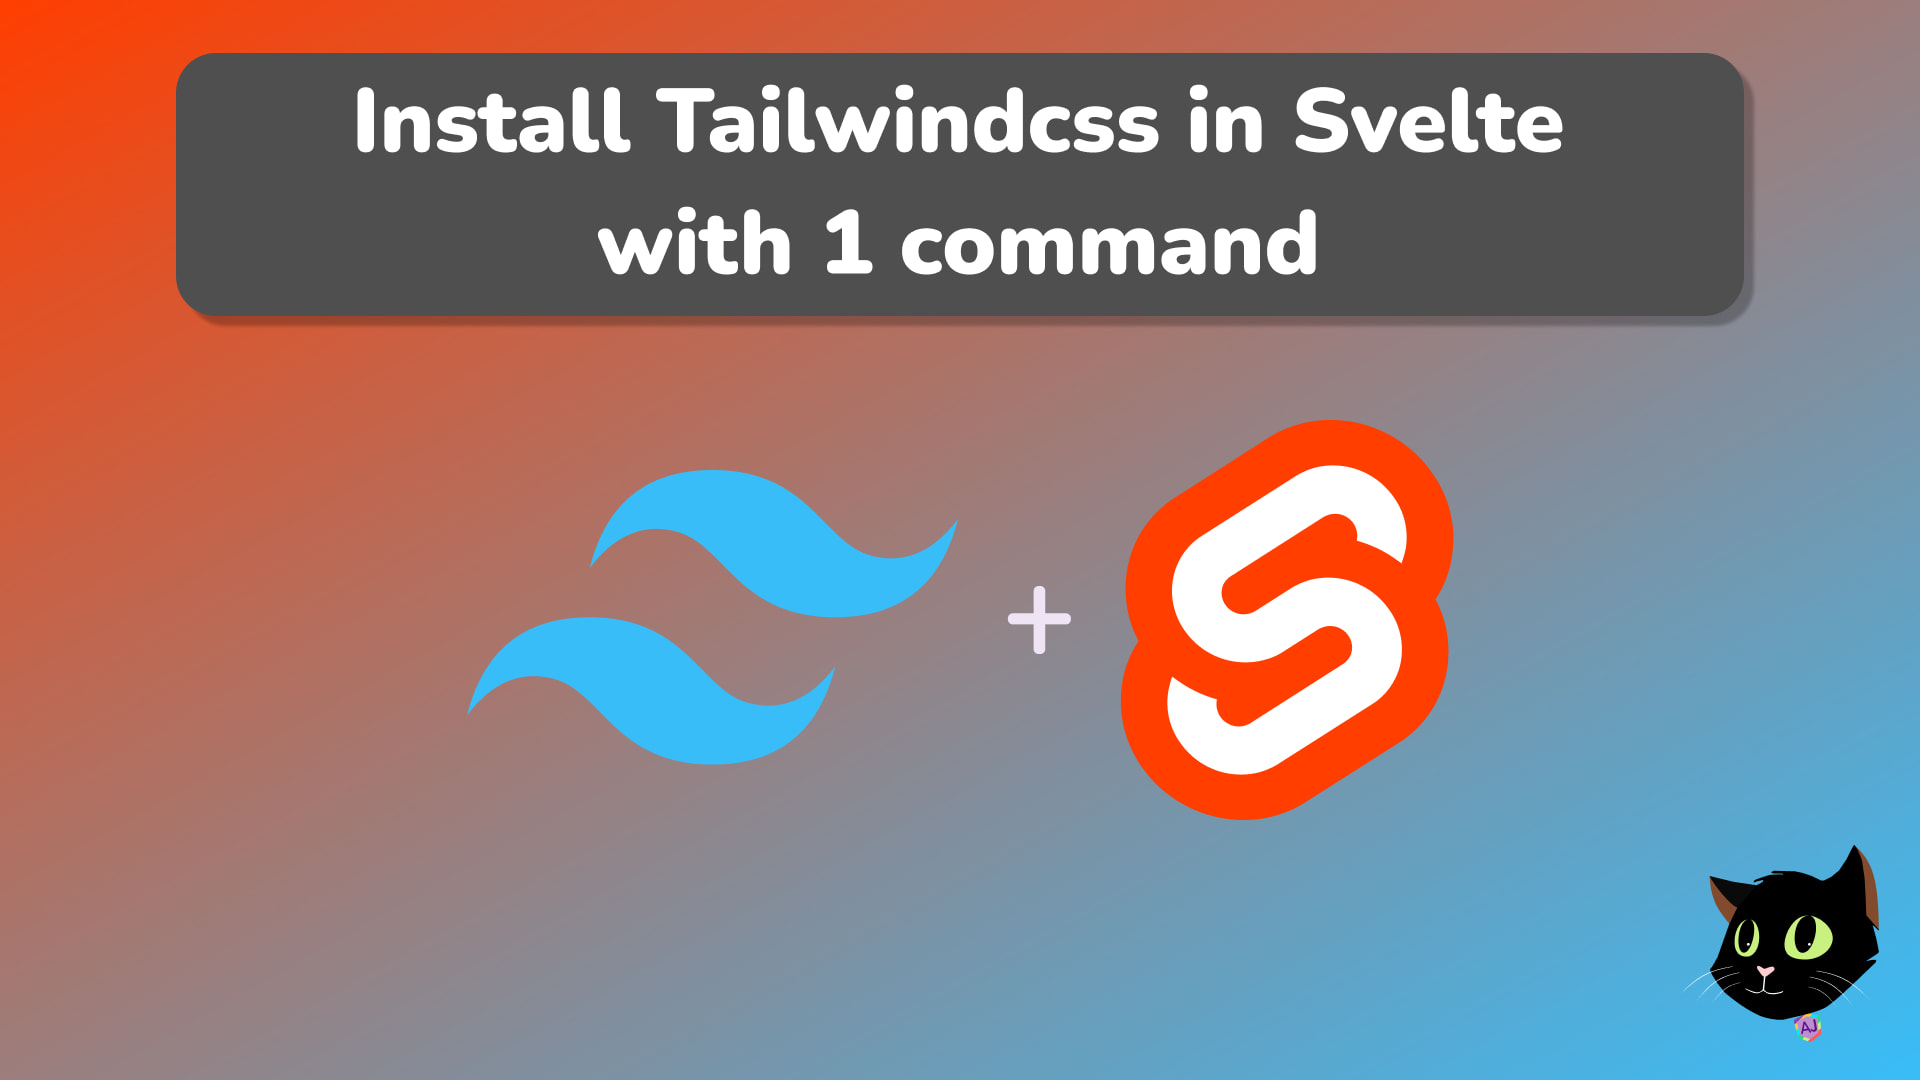 Install Tailwindcss in Svelte with 1 command